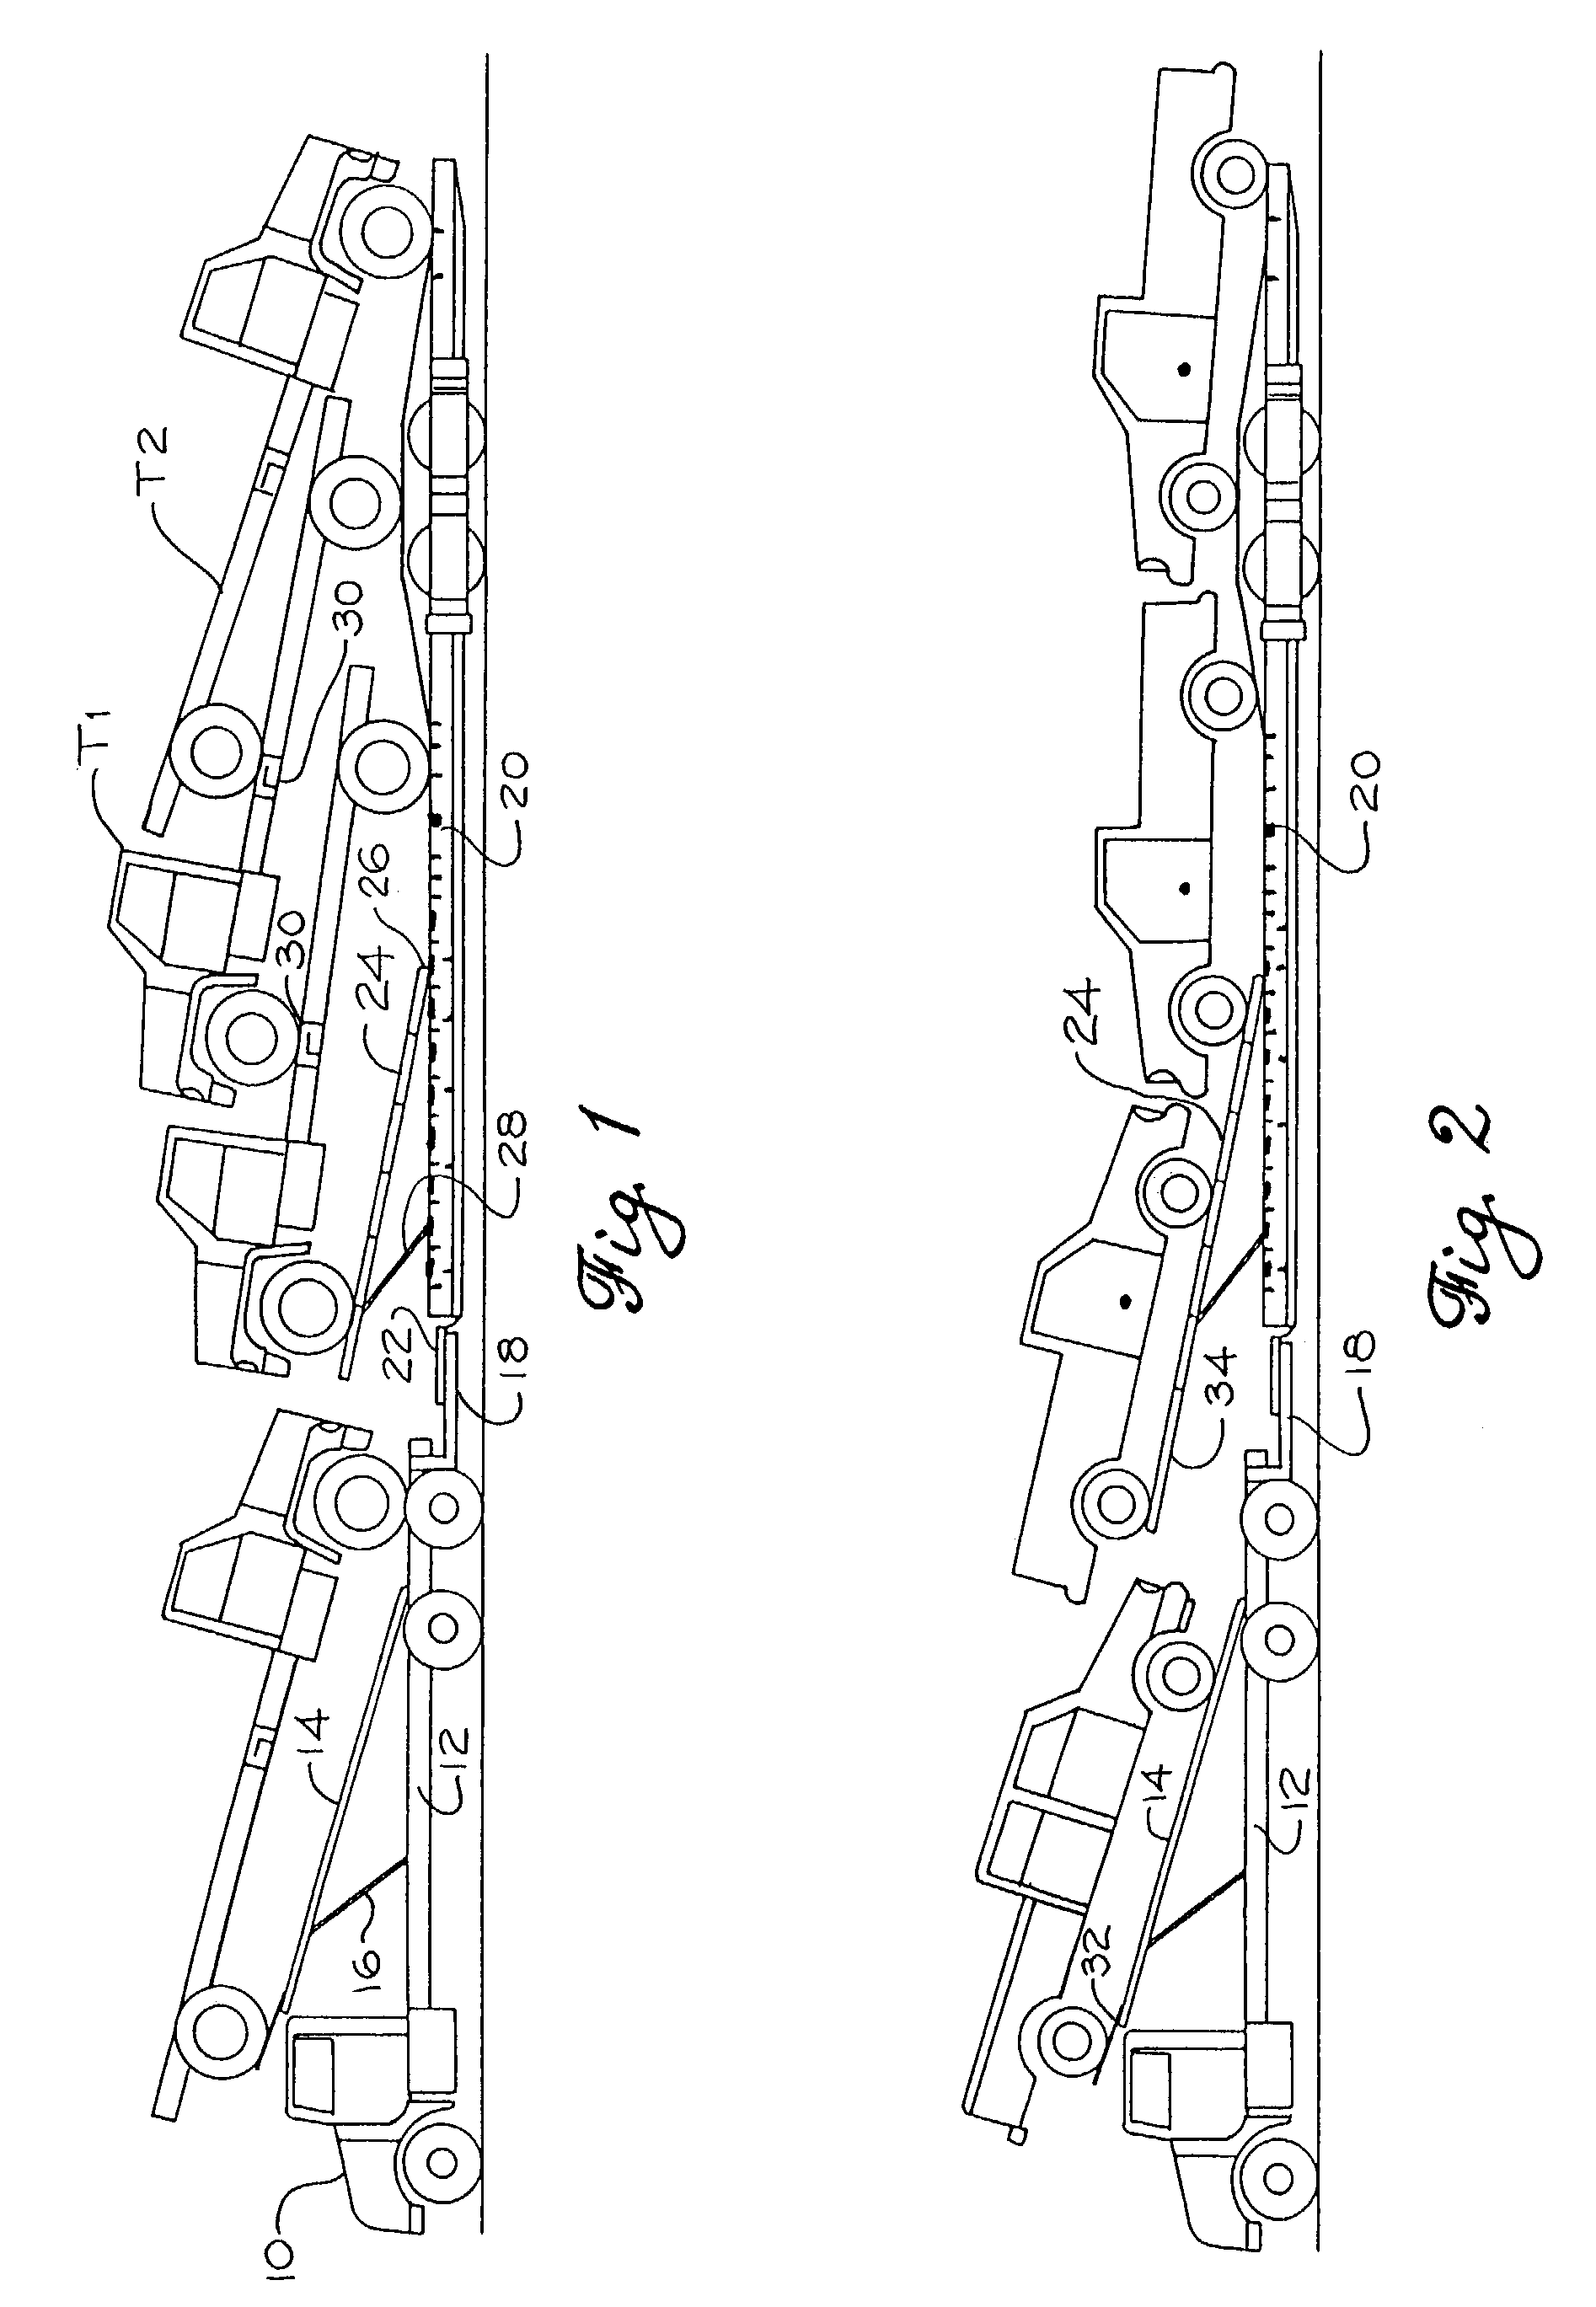 Trailer apparatus and assembly for transportation of wheeled vehicles